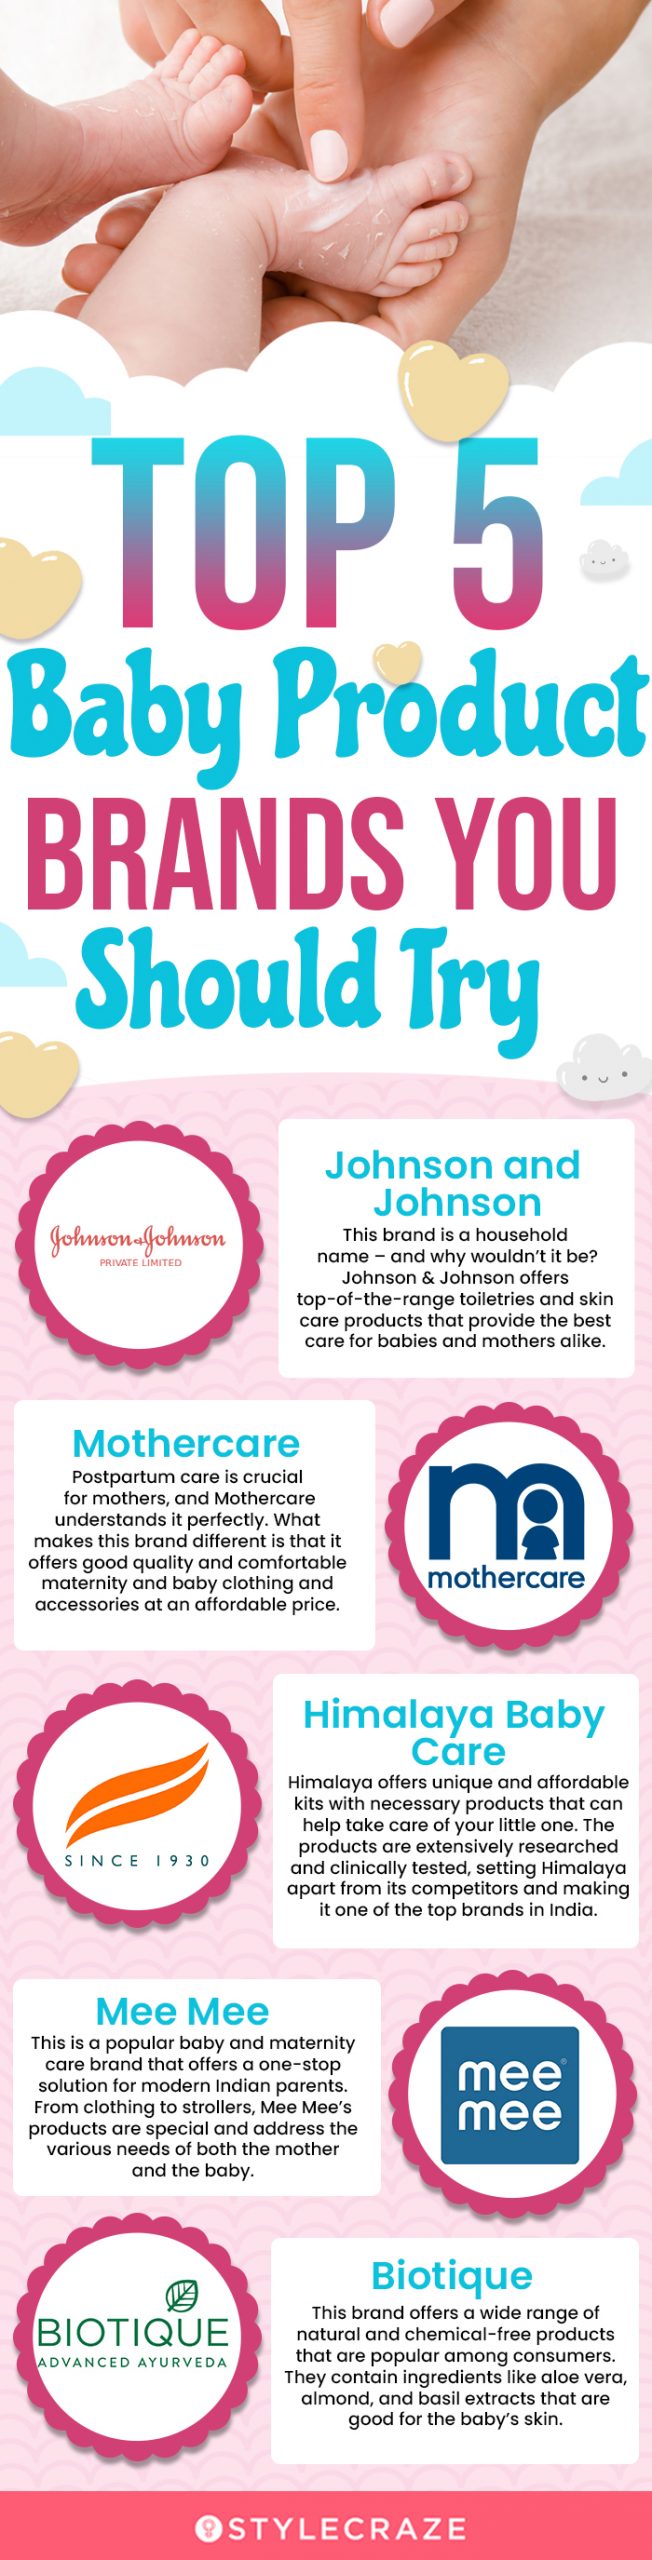 top 5 baby product brands you should try (infographic)